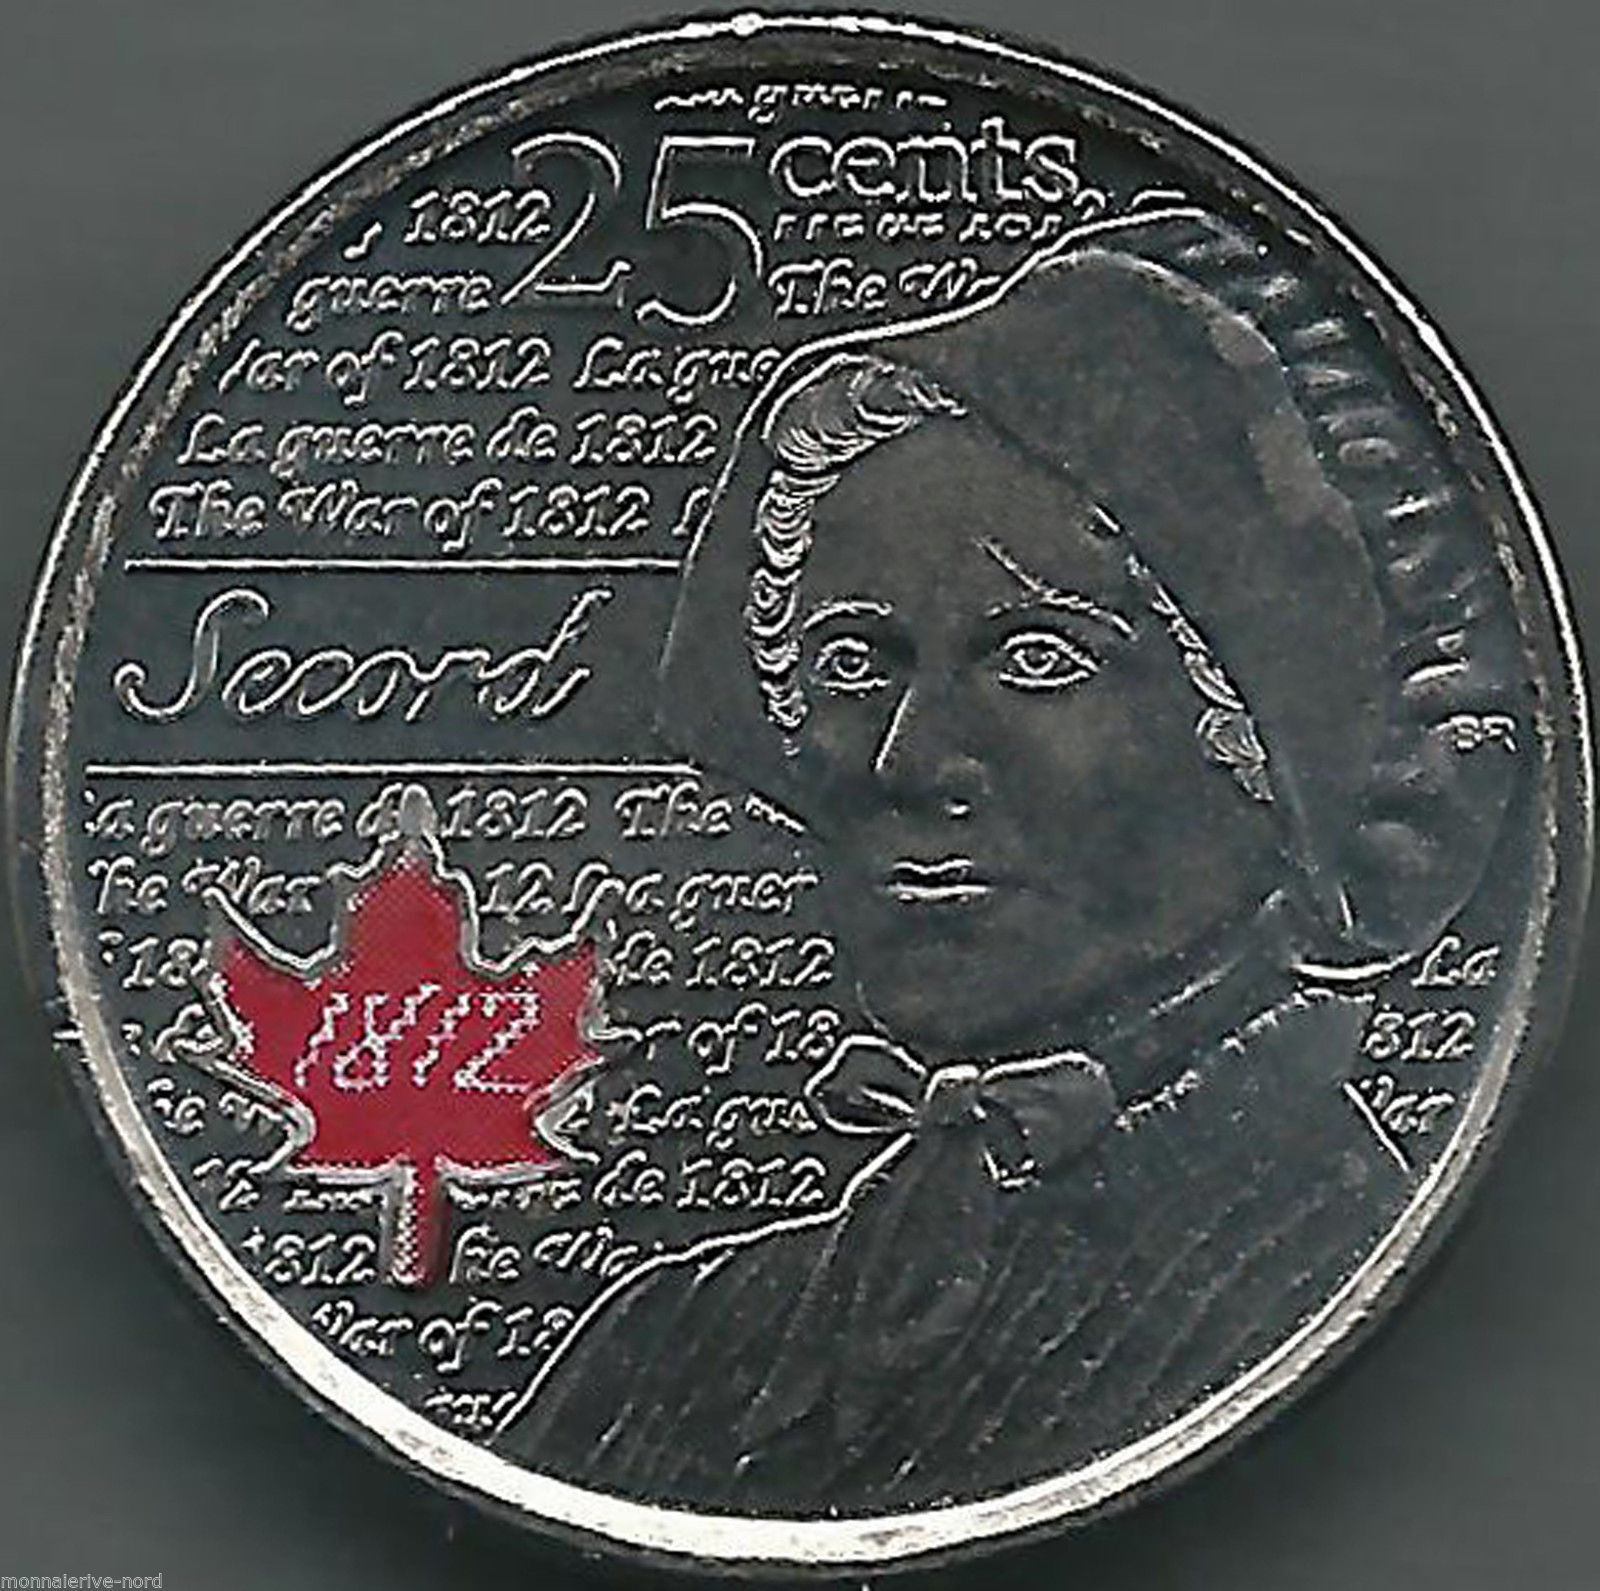 CANADA 2012 -WAR OF 1812 - LAURA SECORD - 25¢ COIN 5th OF SERIES RED IN RCM WRAP